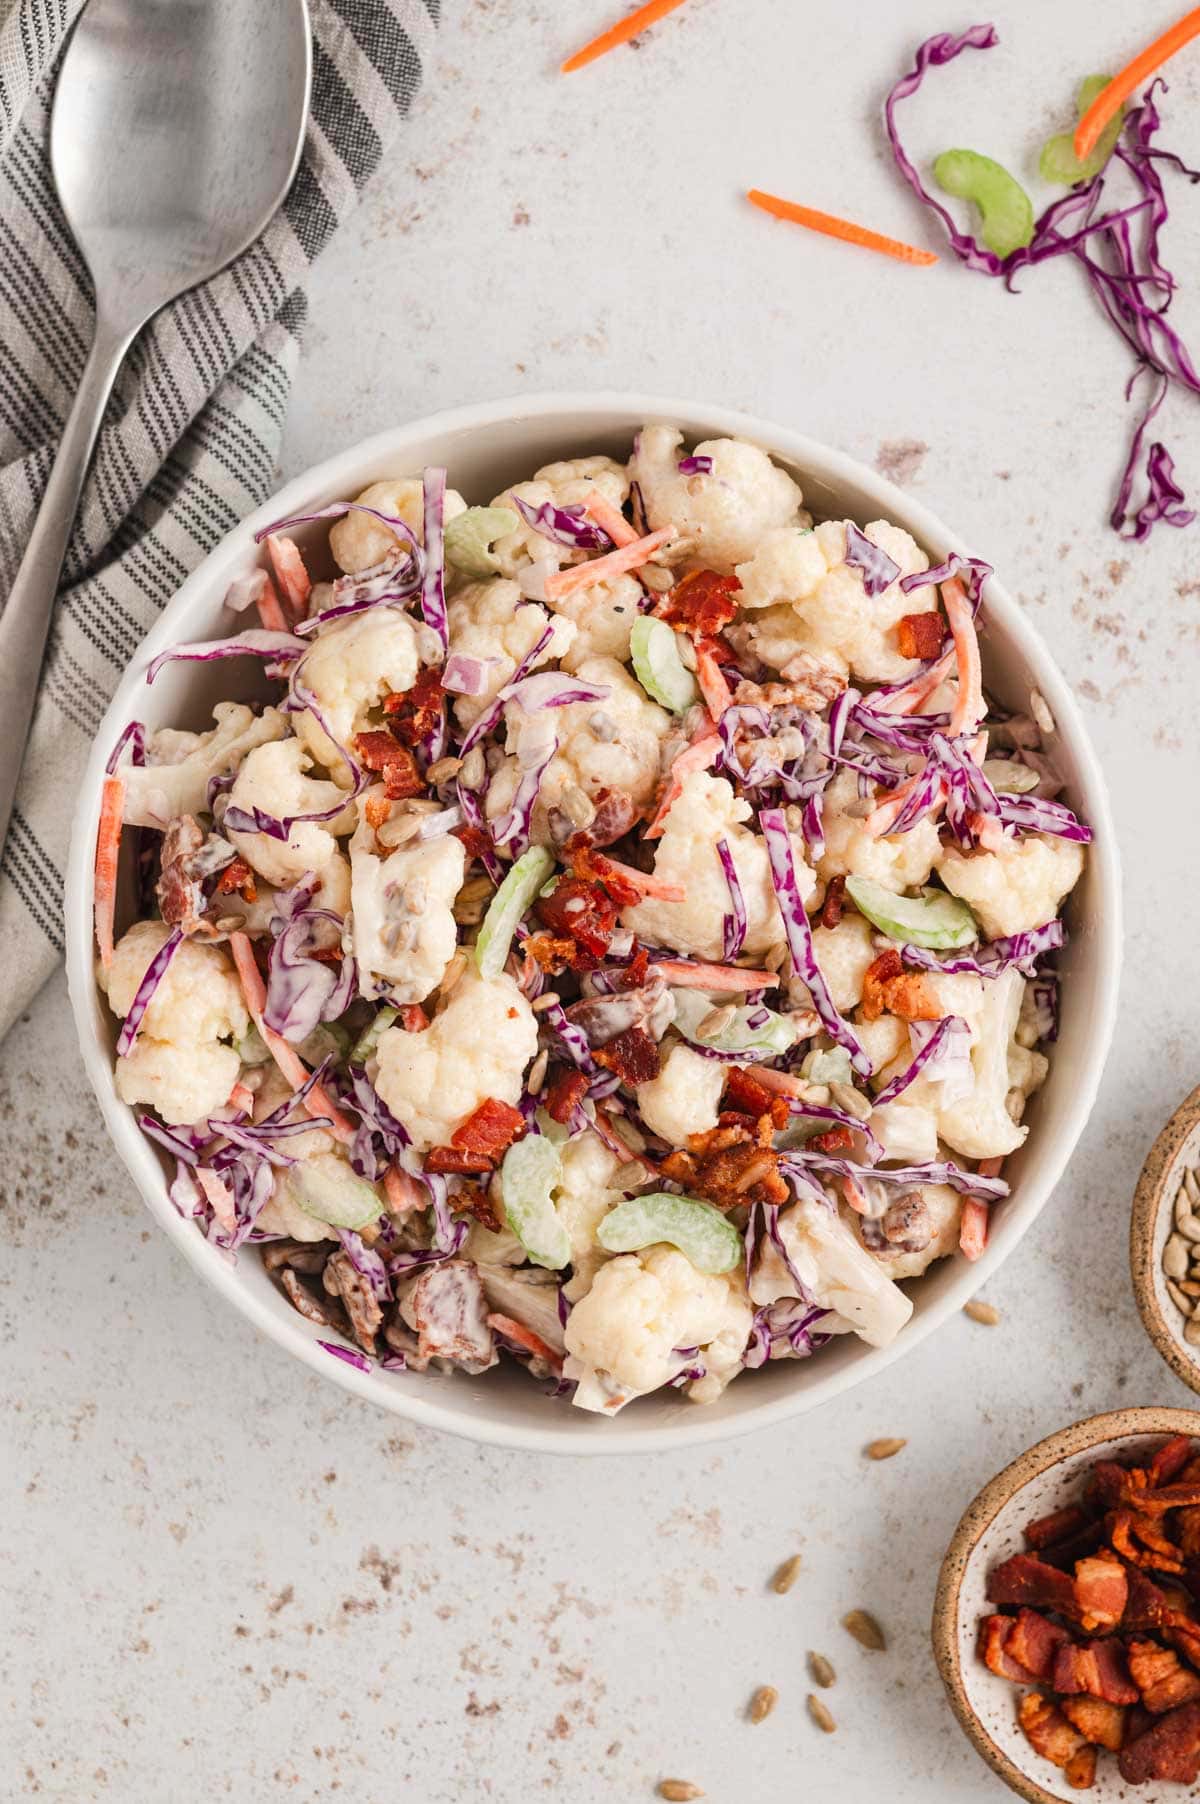 Cauliflower salad with red cabbage and bacon.